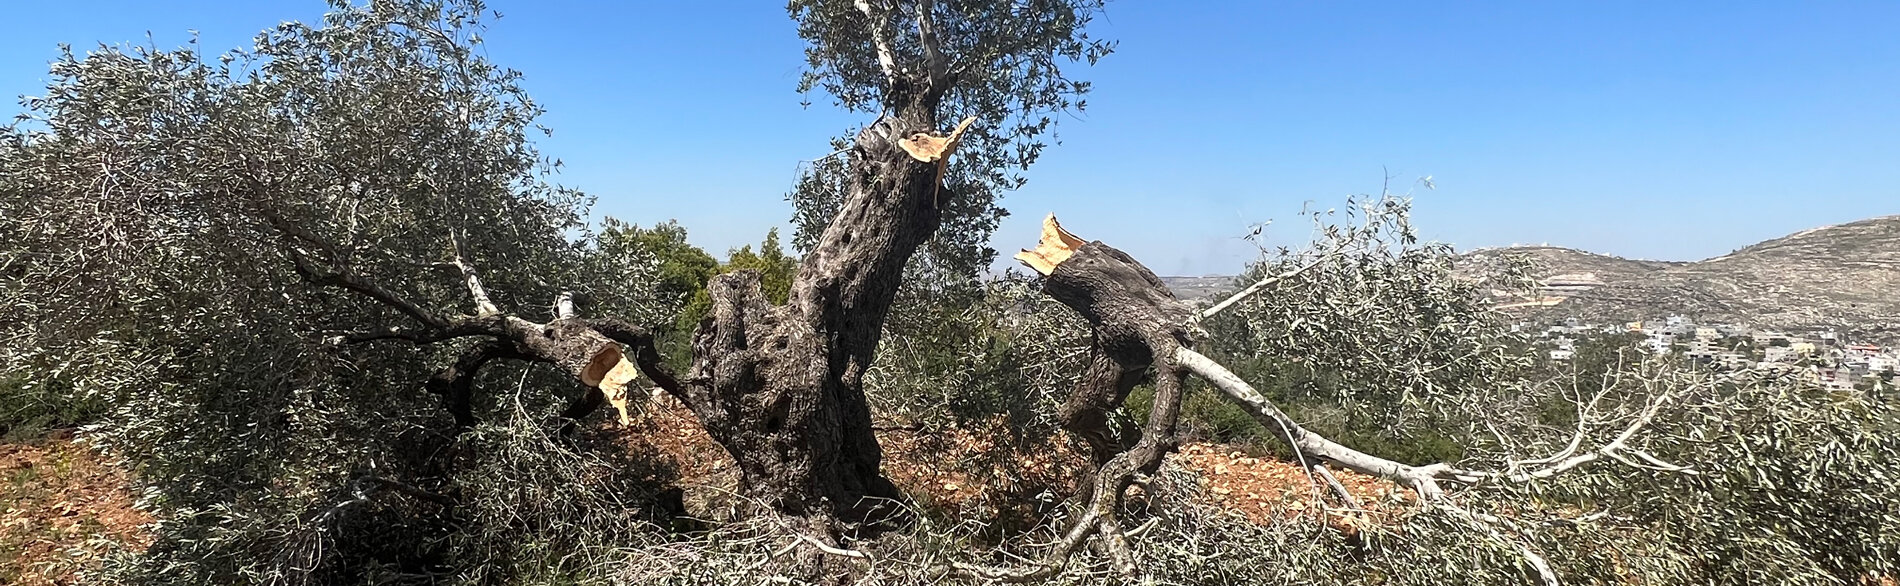 An olive tree vandalized by Israeli settlers in the Palestinian village of Qaryut, Nablus, April 2023. Photo by OCHA